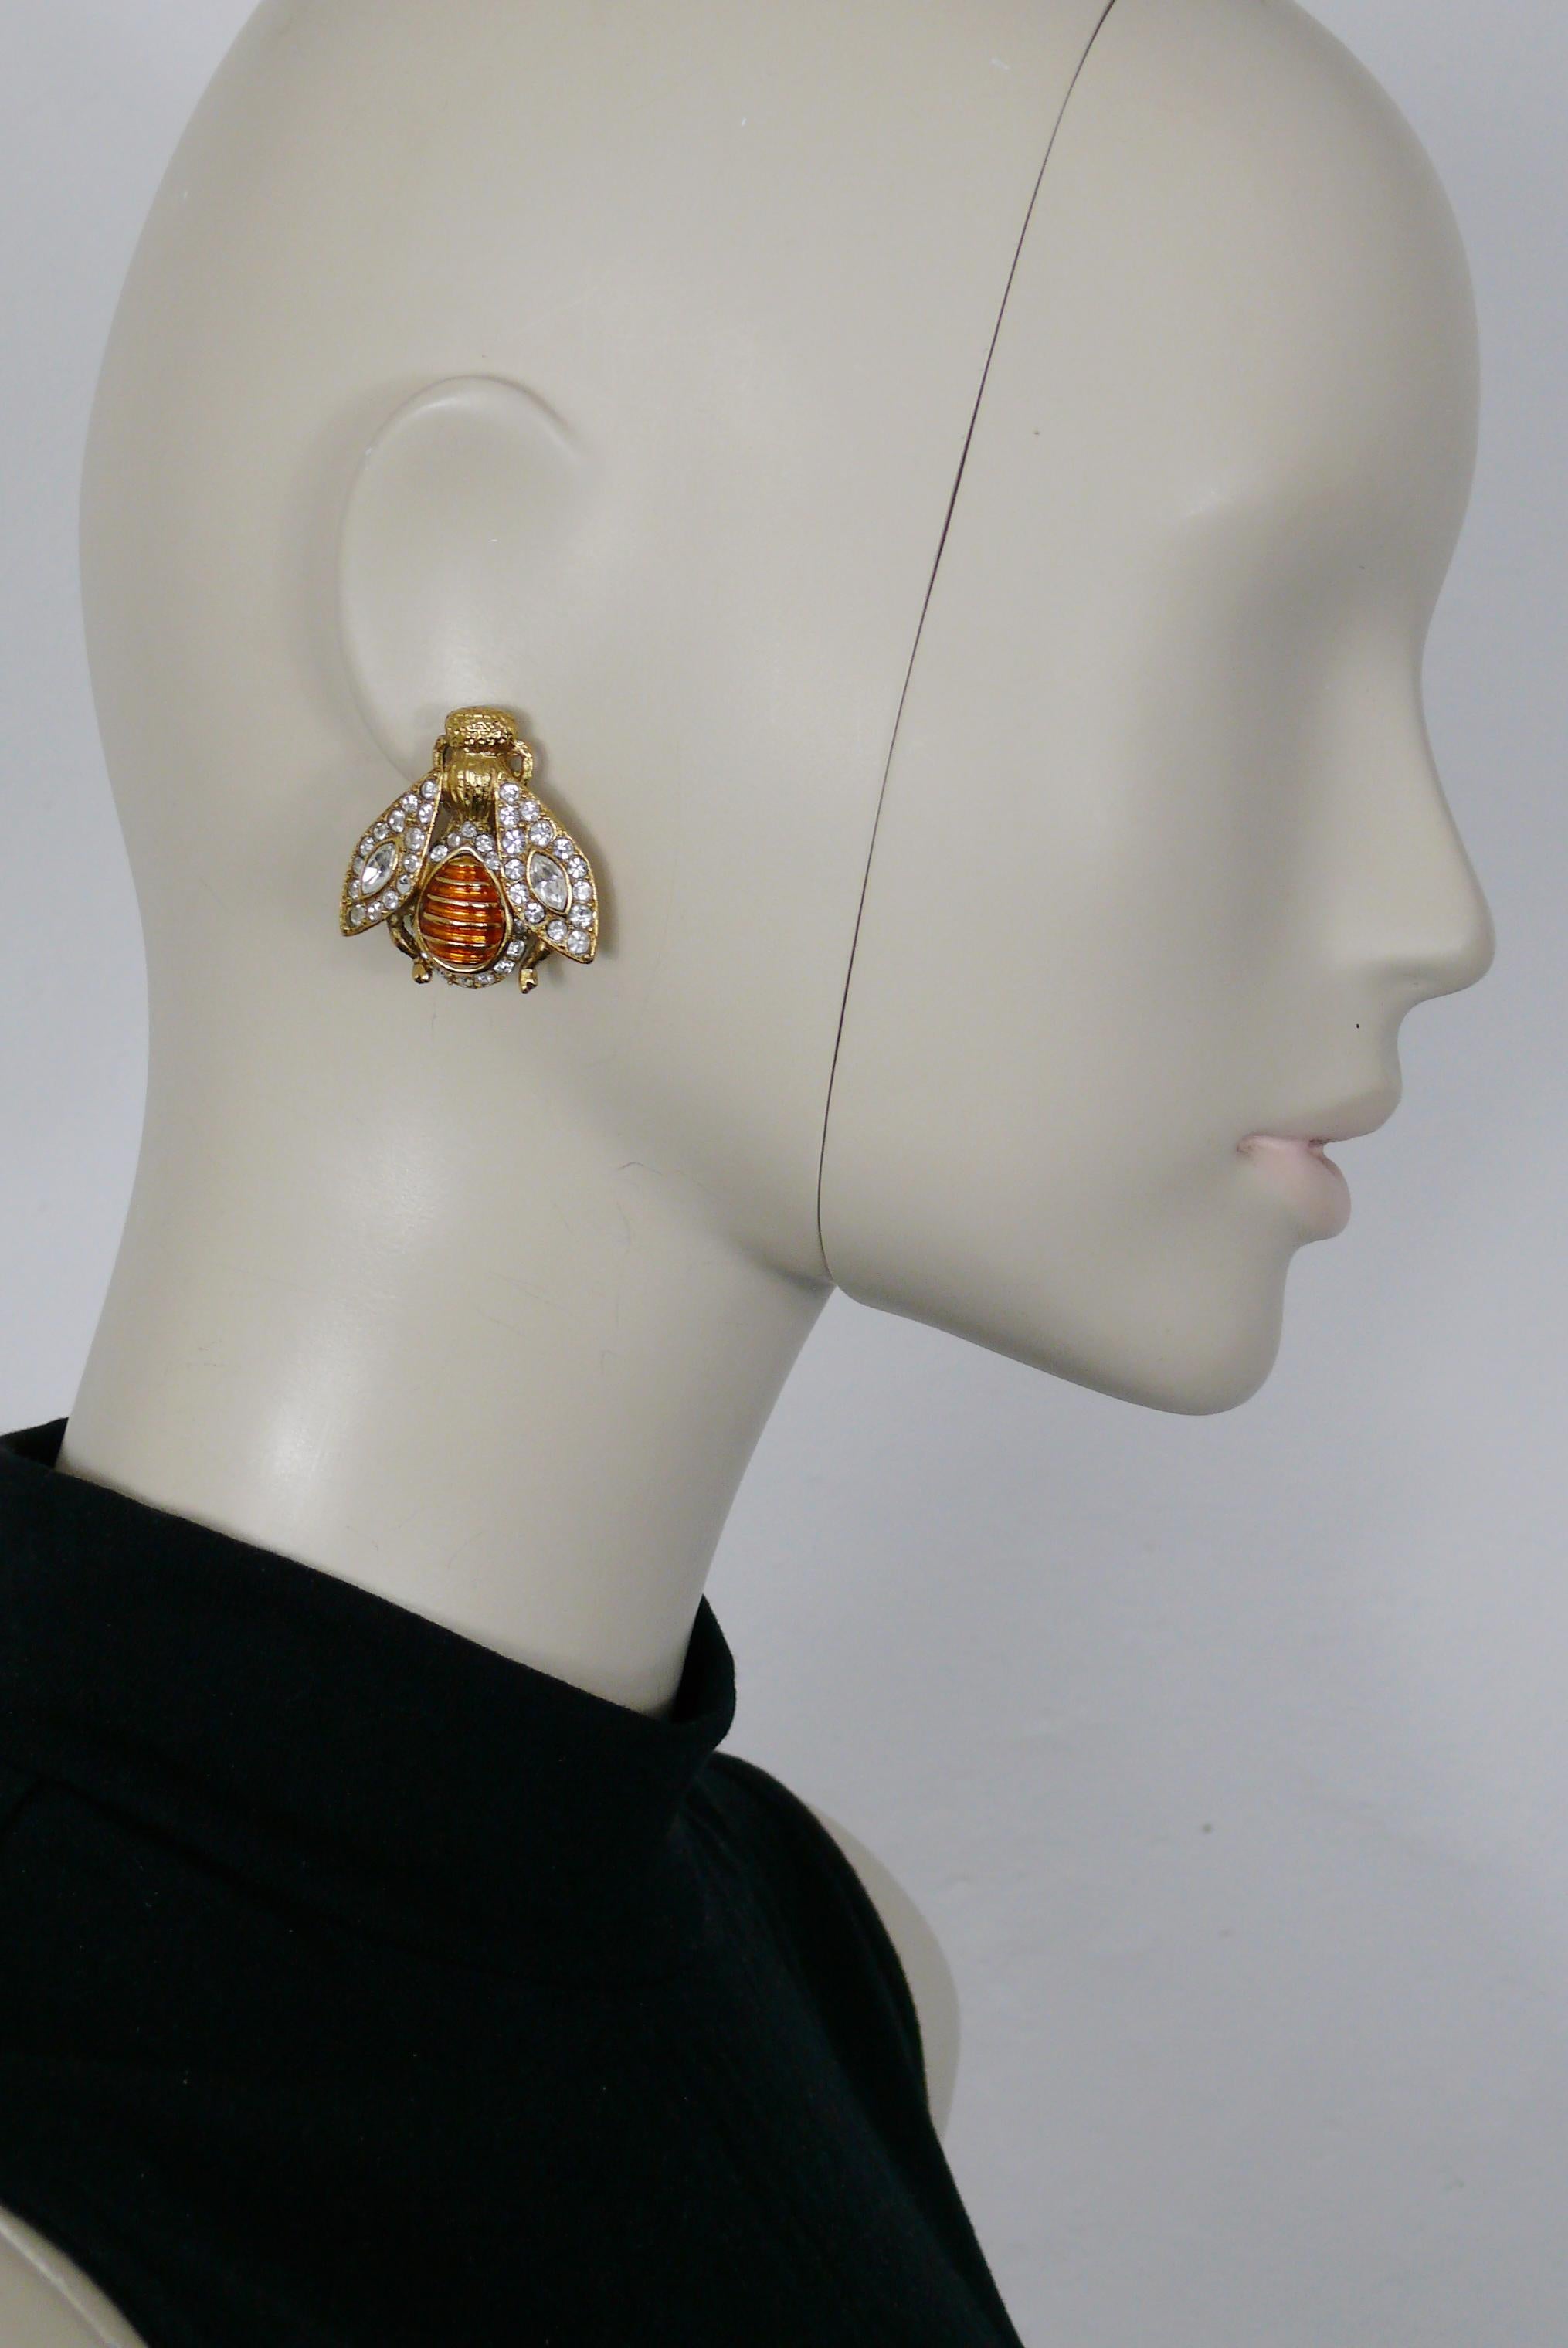 CHRISTIAN DIOR iconic gold toned bee clip-on earrings embellished with orange enamel and clear crystals.

Marked CHRISTIAN DIOR Boutique.

Indicative measurements : max. height approx 3.6 cm (1.42 inches) / max. width approx. 3.3 cm (1.30